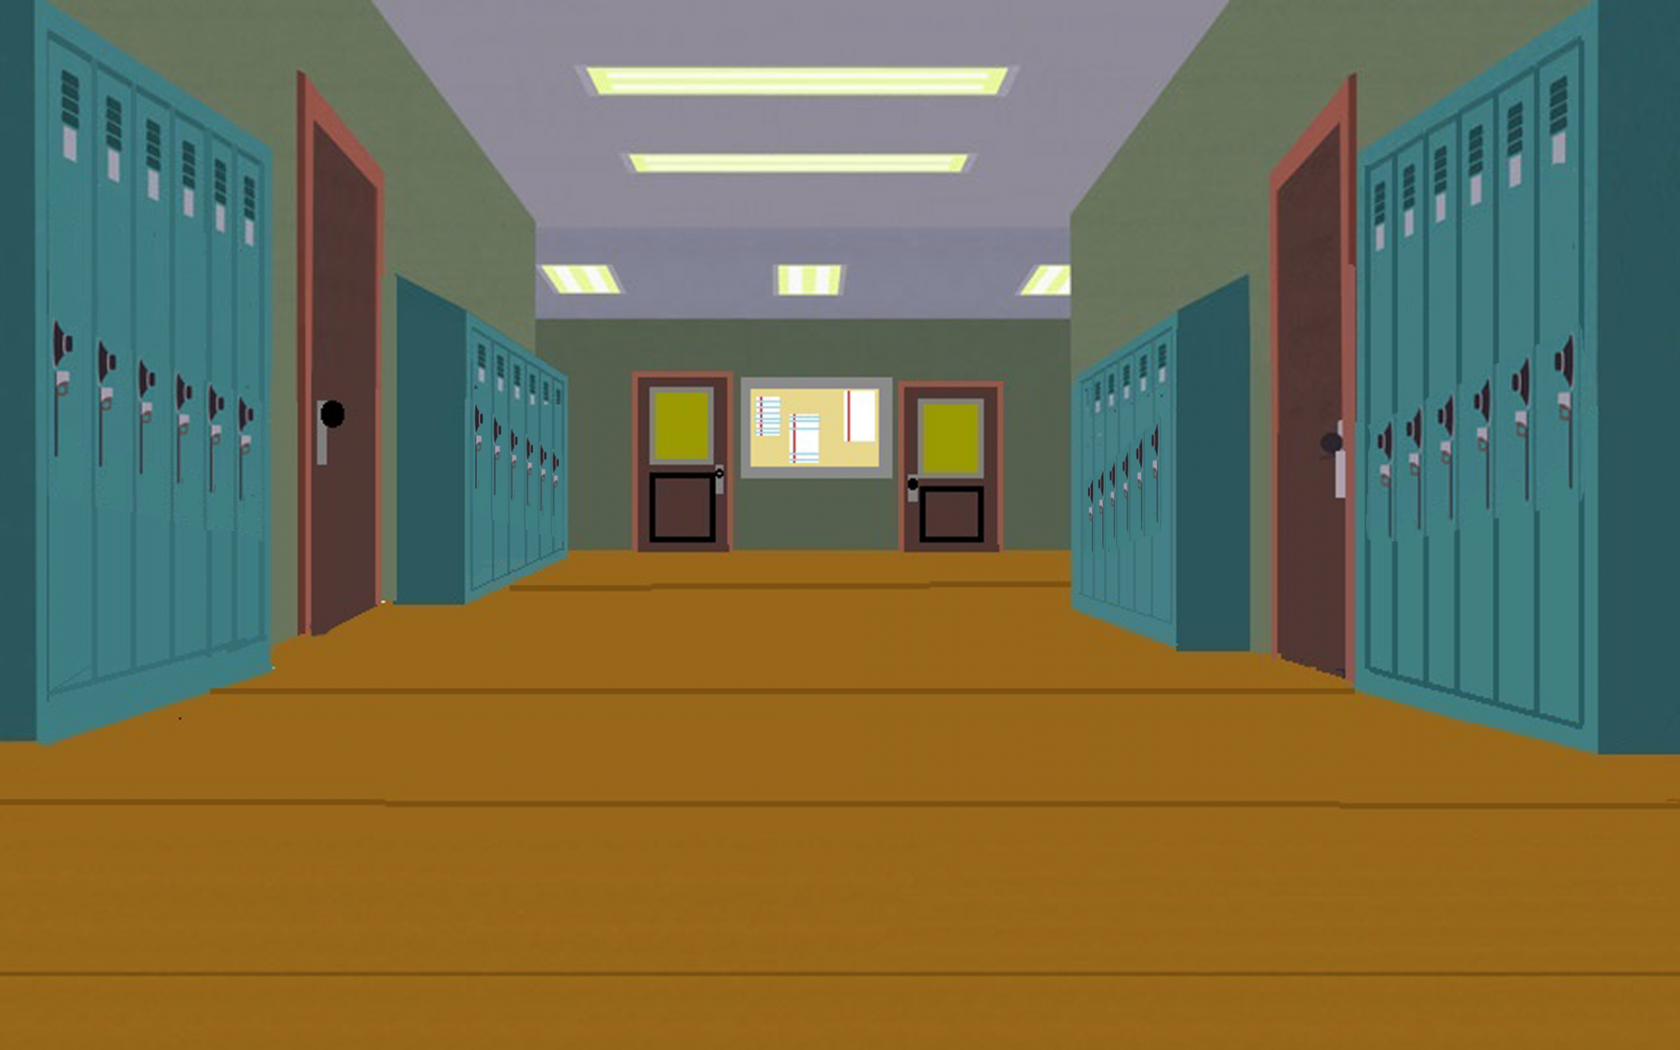 Free download South Park Elementary School Hallway by spongekid1999 [2000x1125] for your Desktop, Mobile & Tablet. Explore Elementary School Wallpaper. Elementary School Desktop Wallpaper, Elementary OS Wallpaper Pack, Elementary